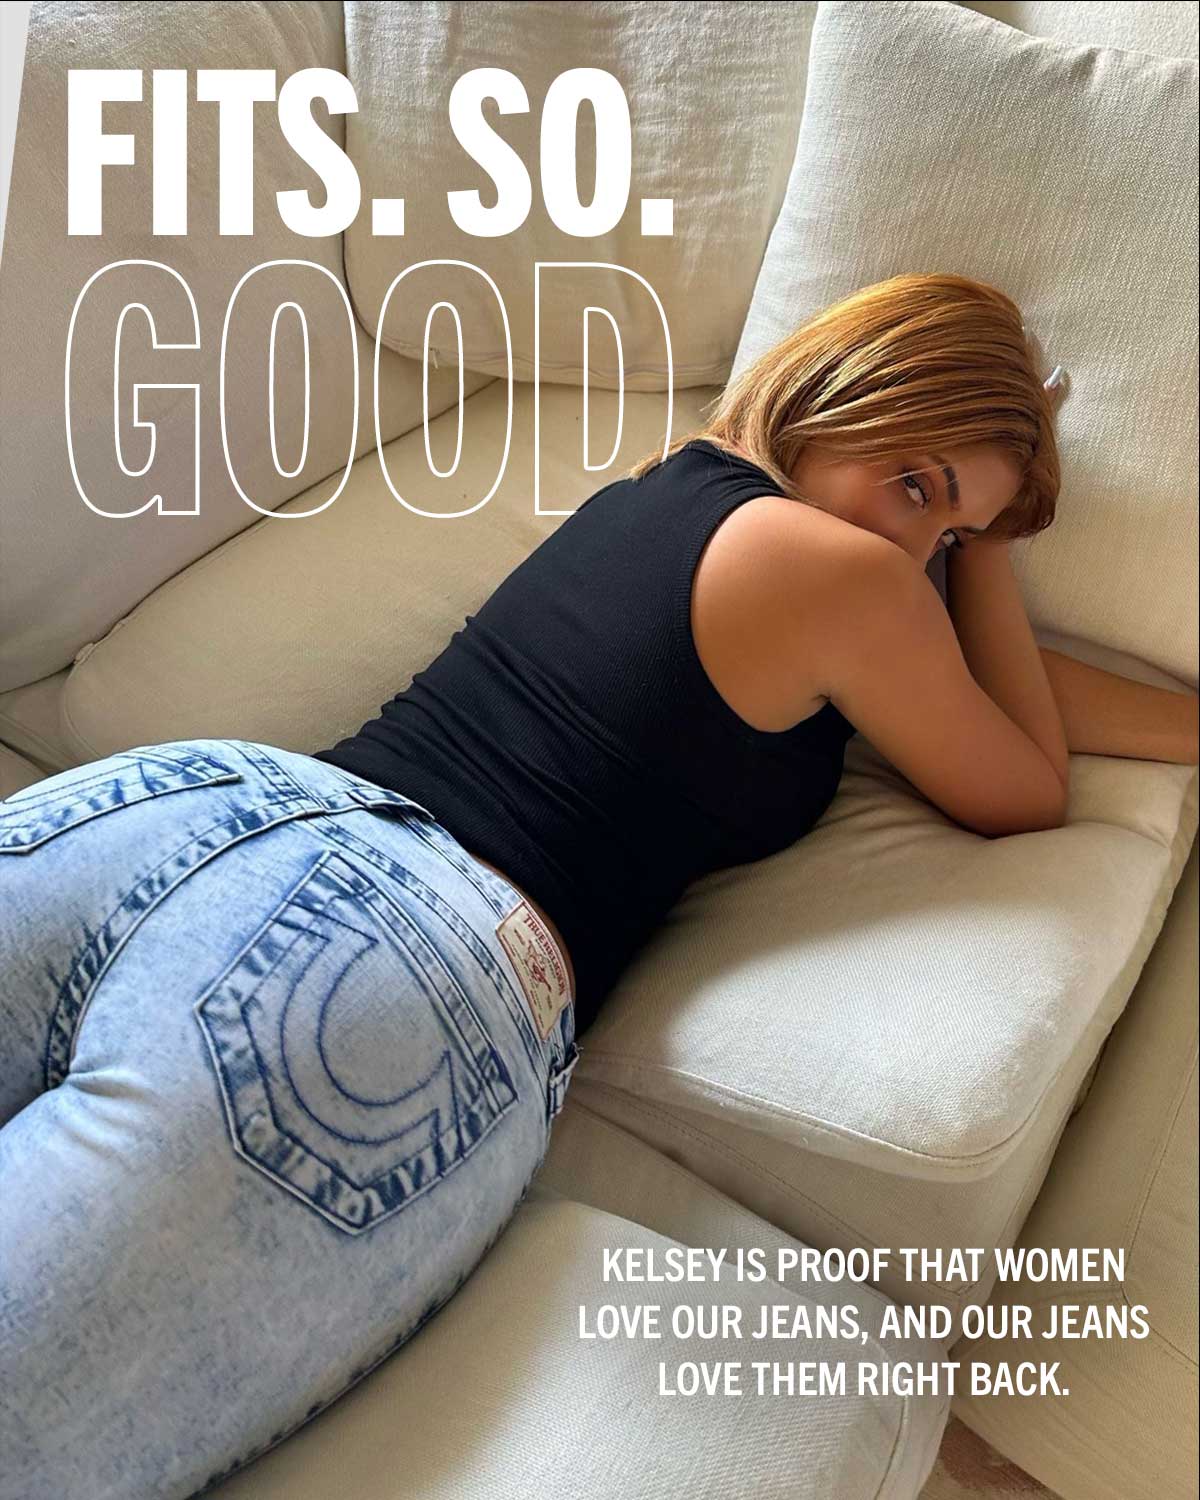 Fits so good. Kelsey is proof that women love our jeans, and our jeans love them right back.